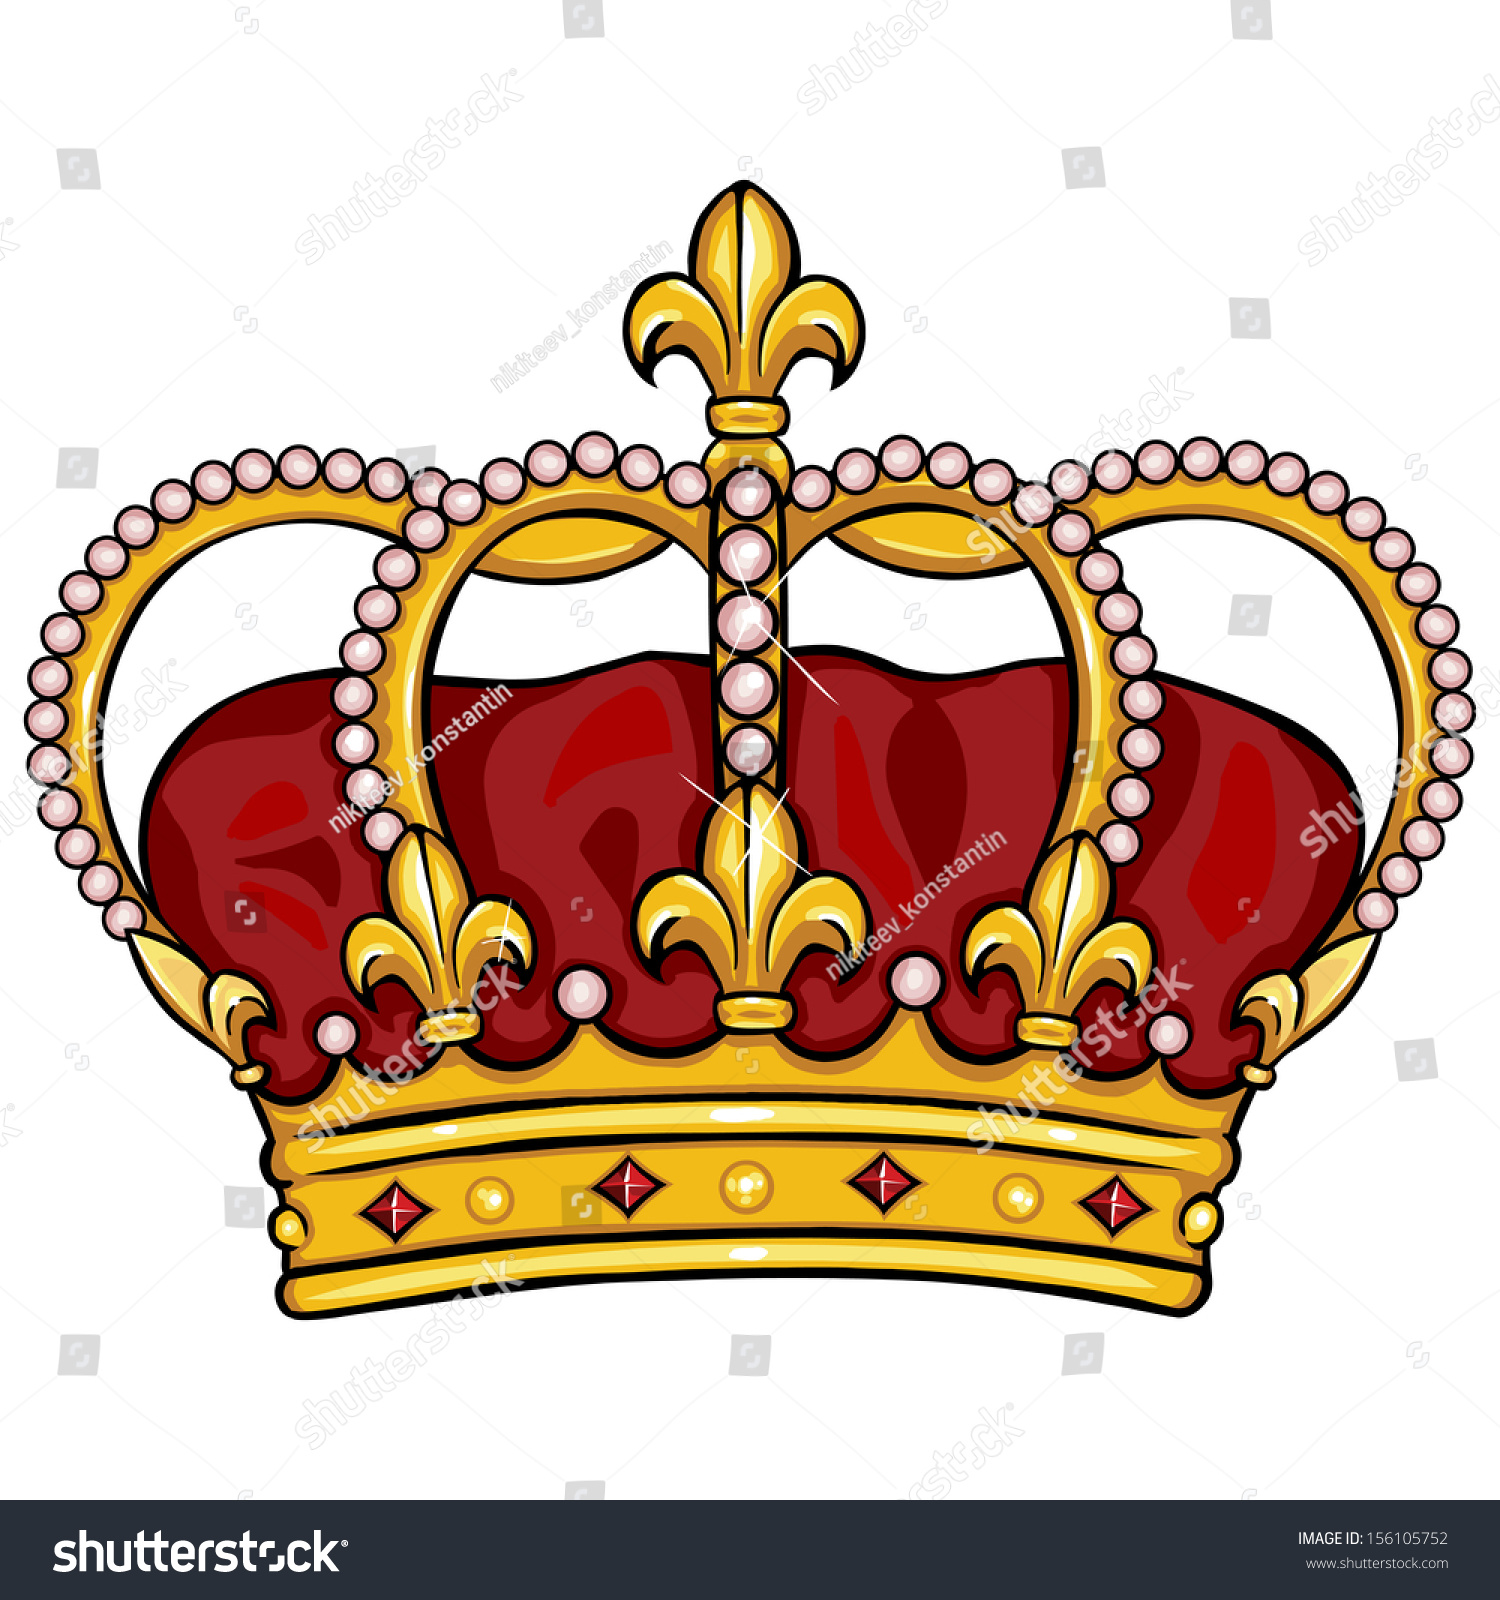 crown jewels clipart - photo #10